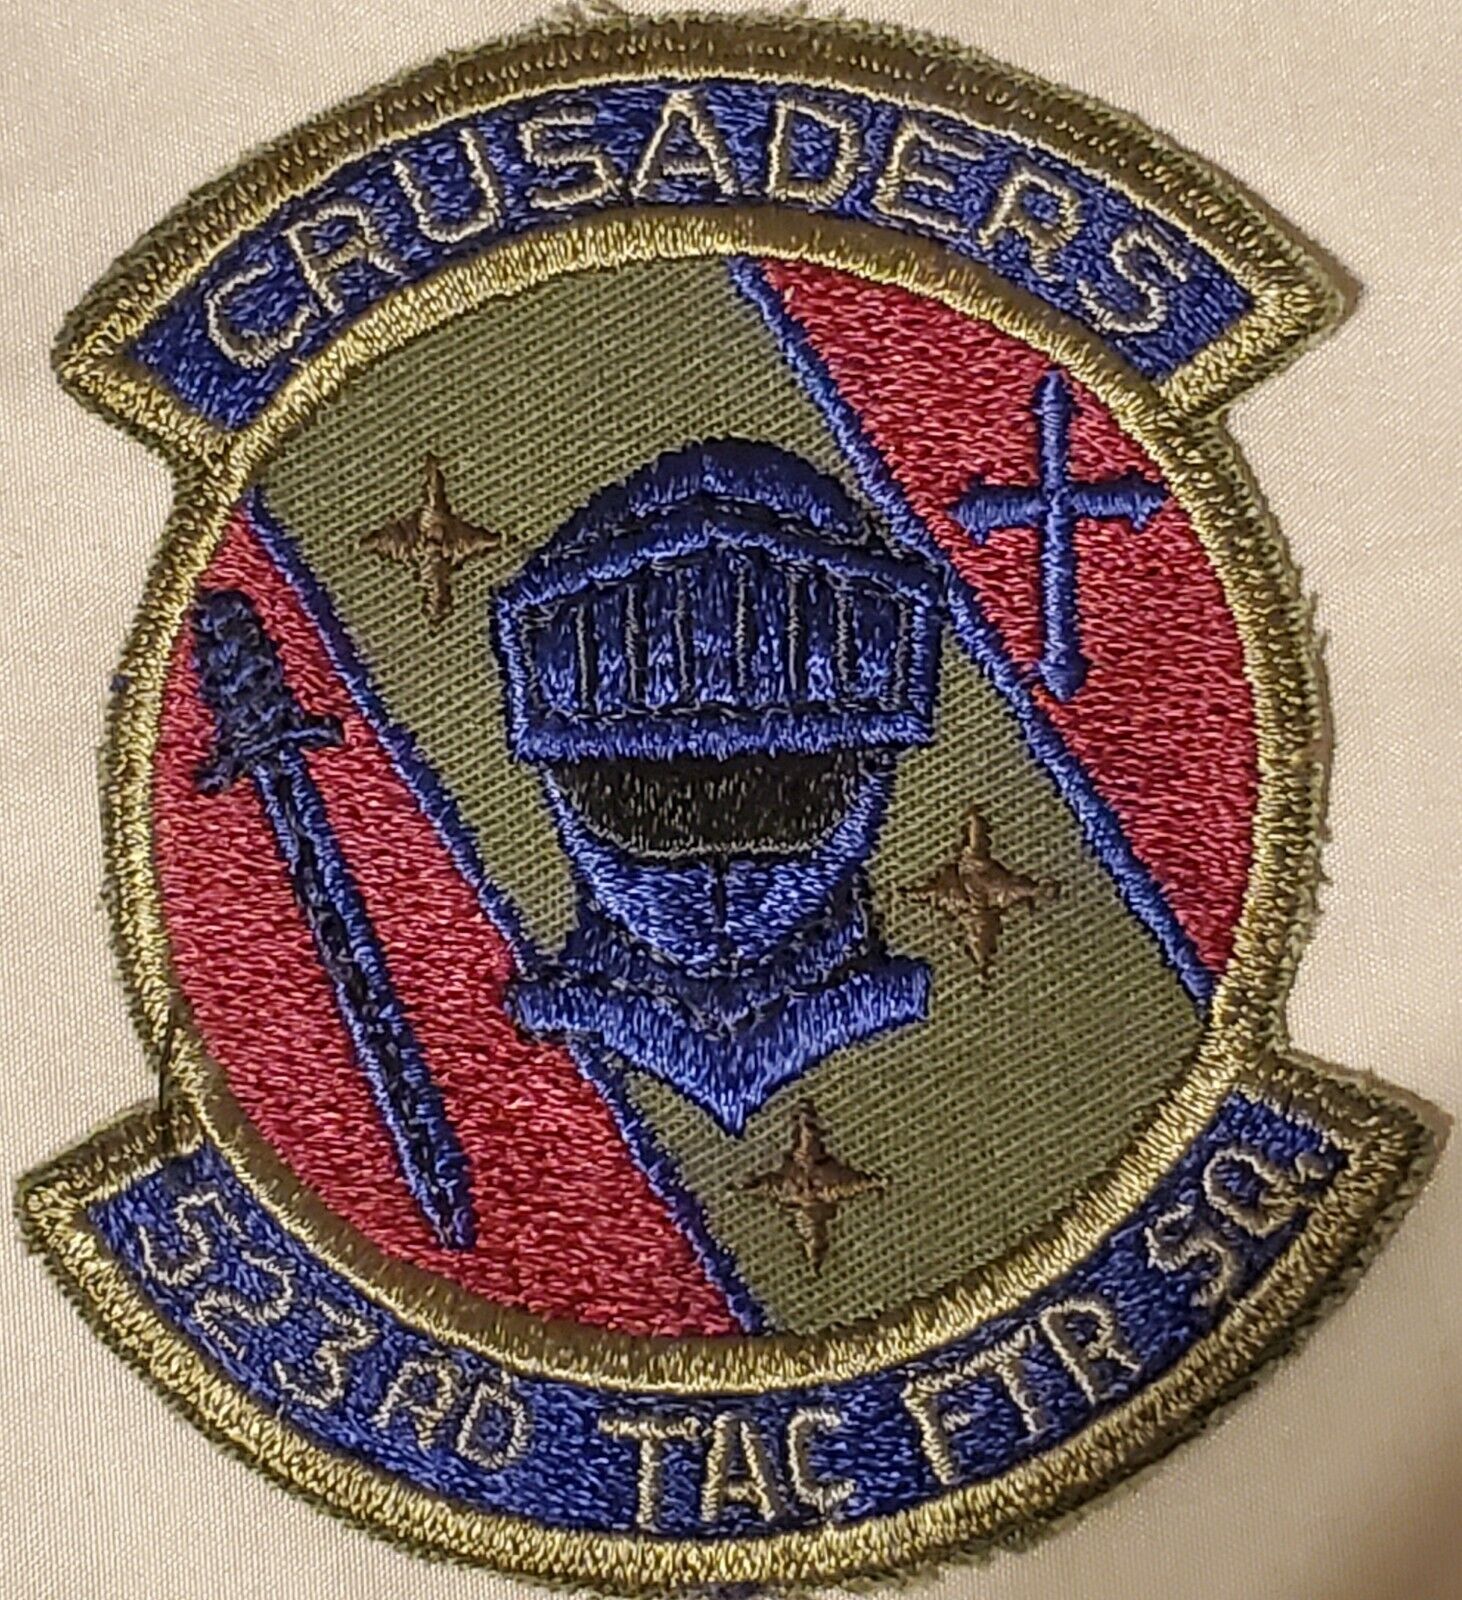 USAF AIR FORCE 523rd TACTICAL FIGHTER SQUADRON PATCH SUBDUED VTG ORG MILITARY 